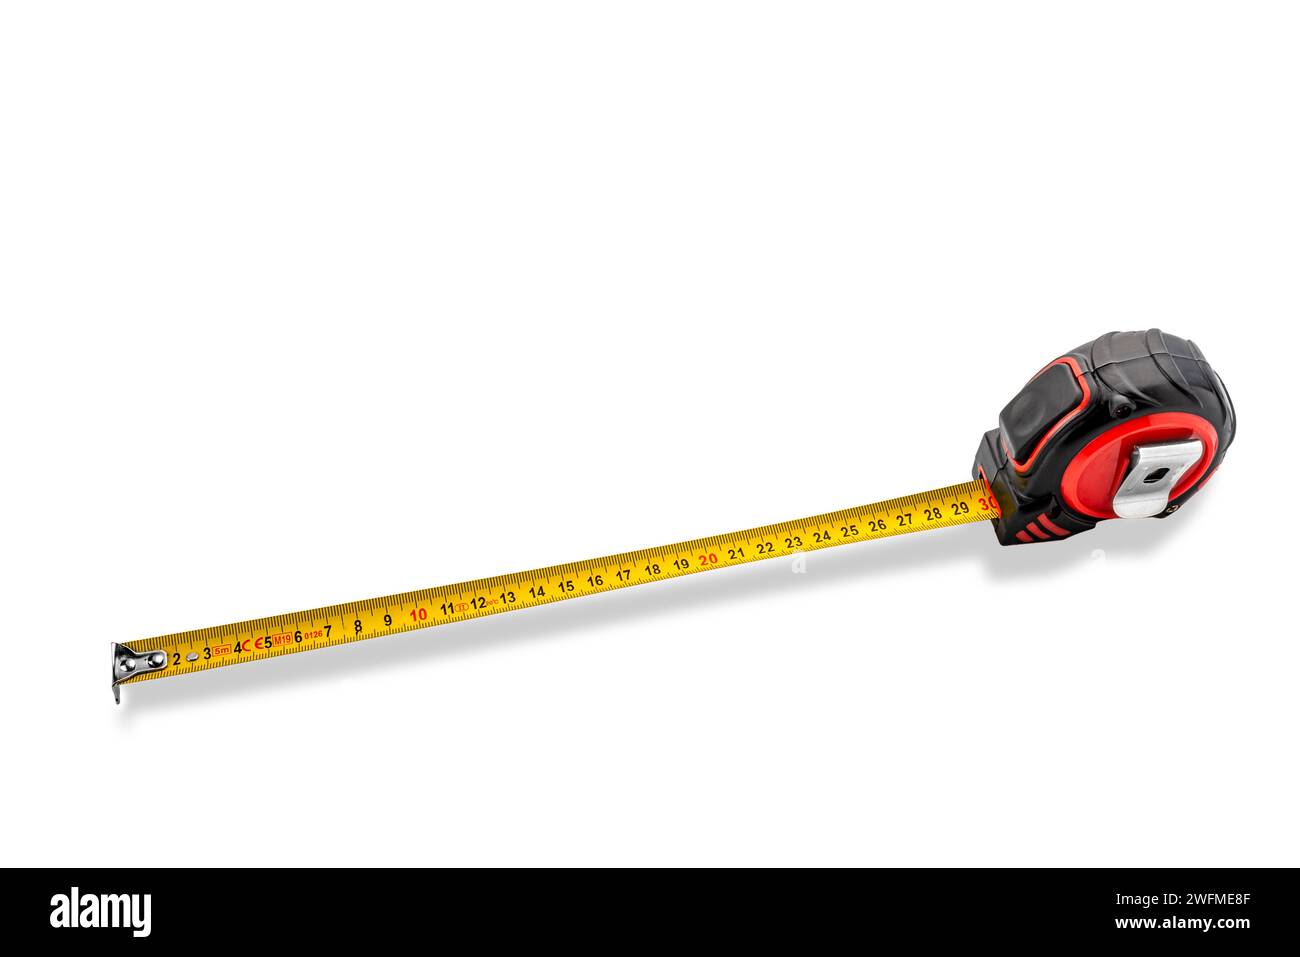 Measuring tape showing length 30 cm isolated on white with clipping path included Stock Photo